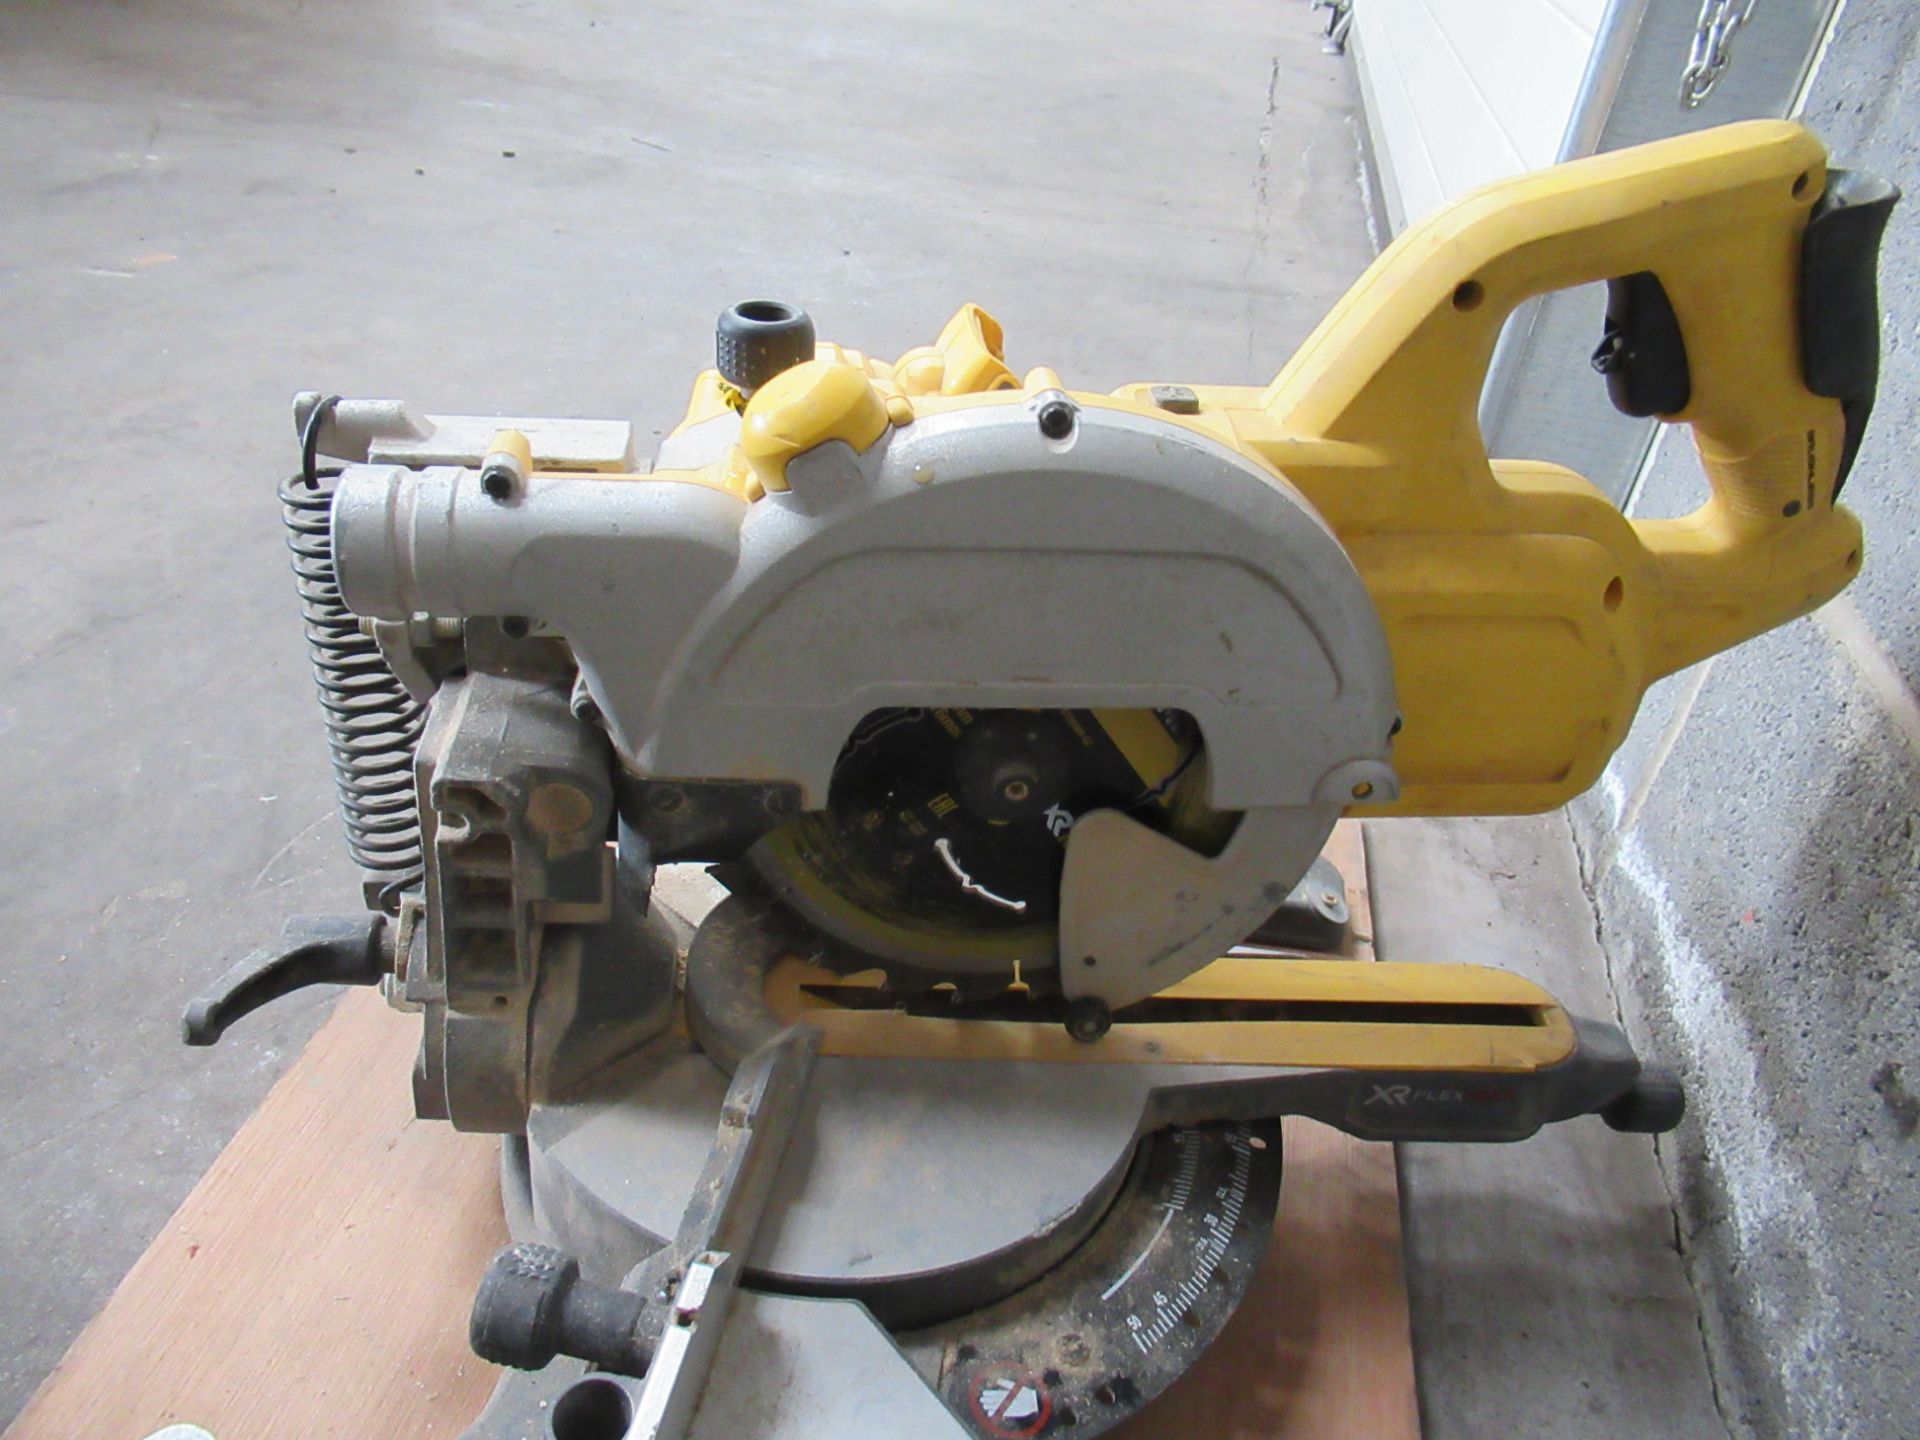 DeWalt DCS777 Battery Powered Mitre Saw - missing battery - Image 4 of 5